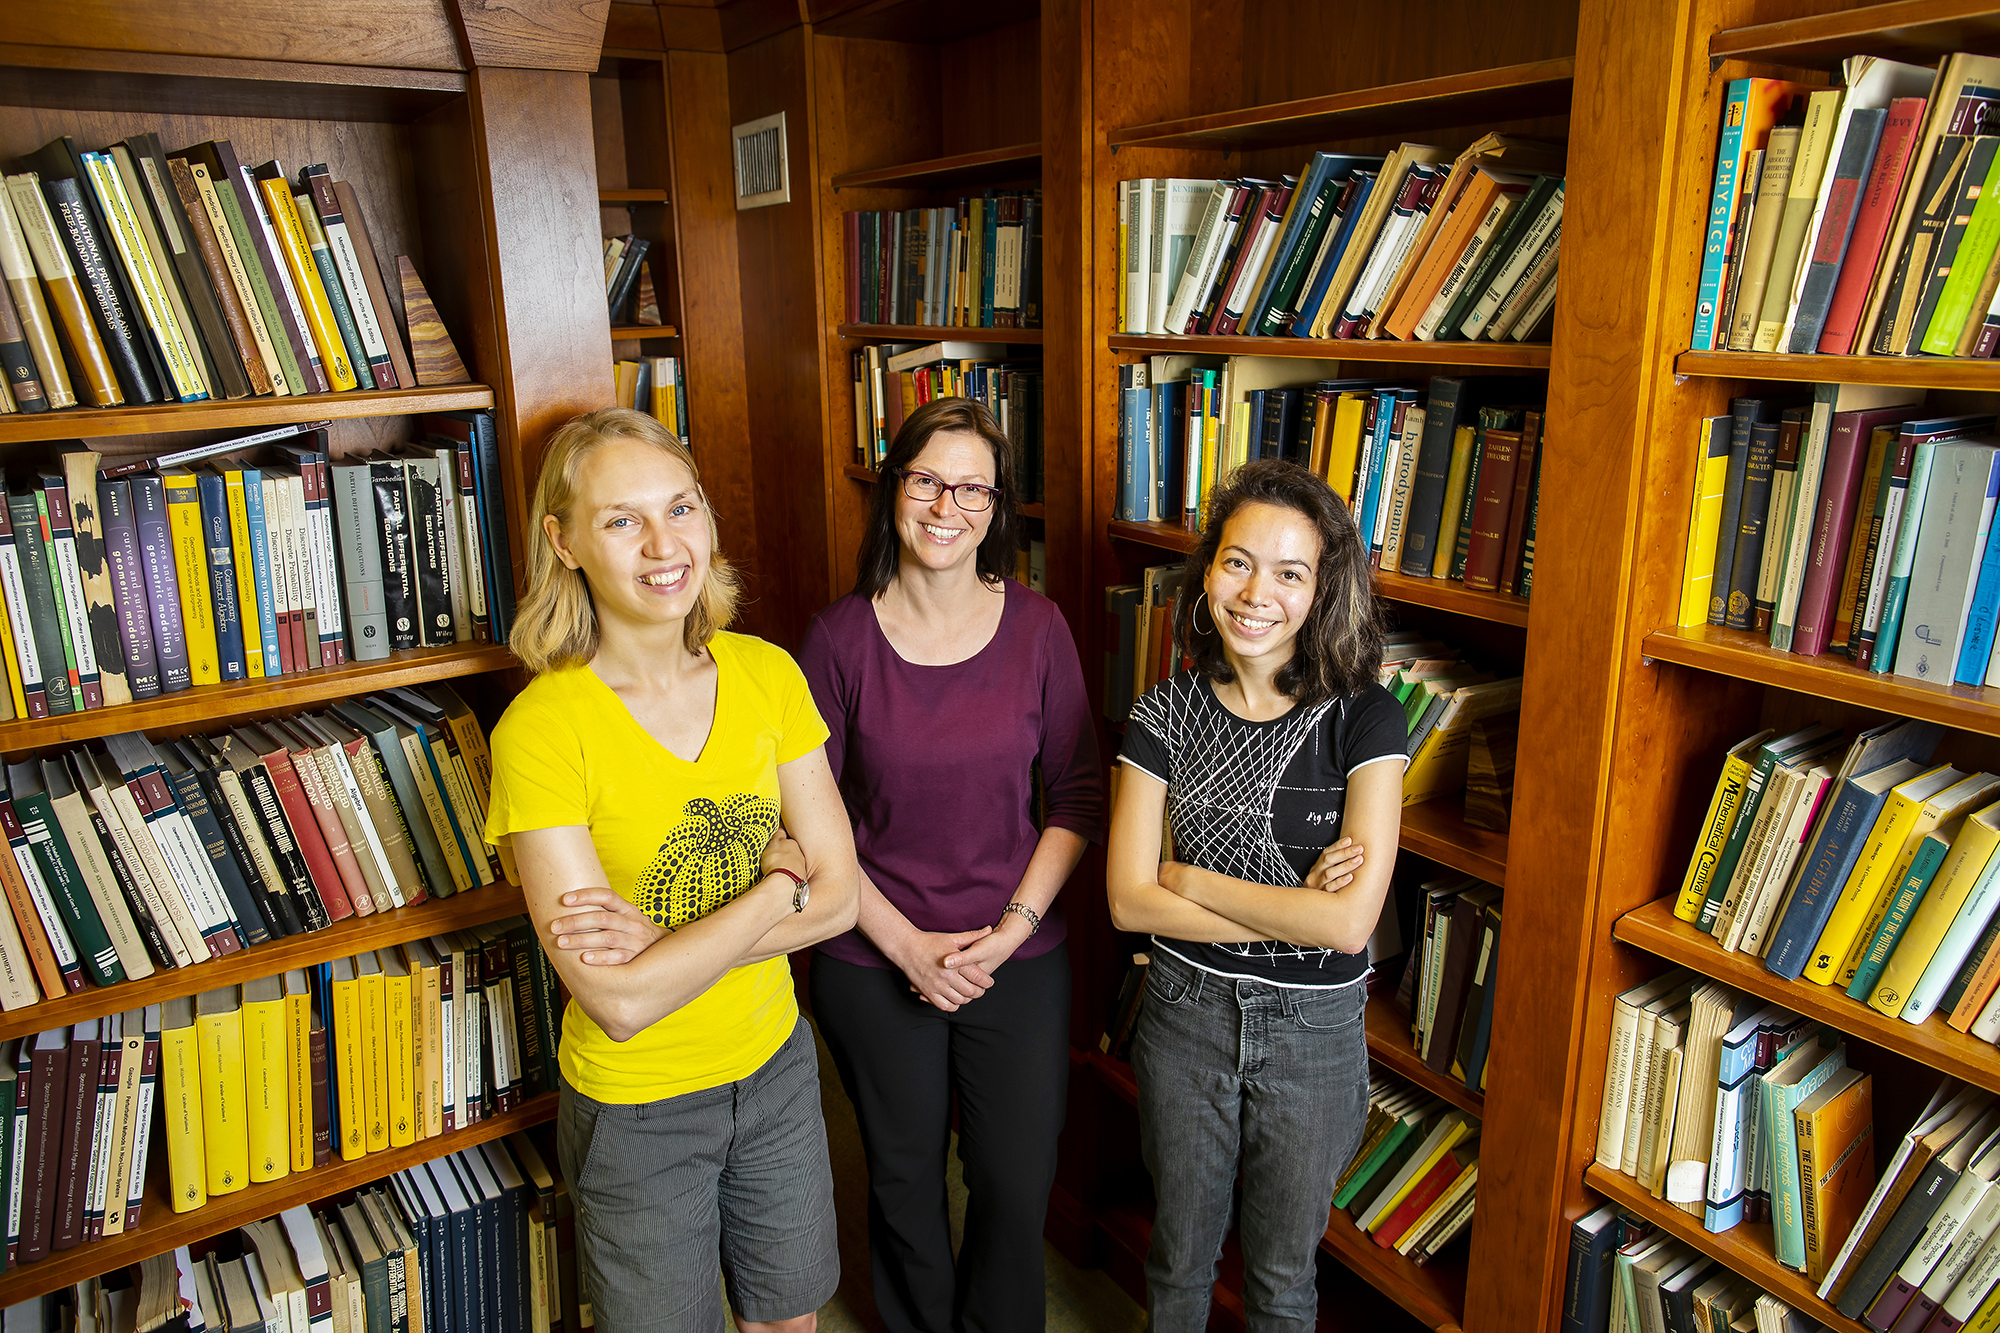 karemaker, hartmann, and bell posing in a library